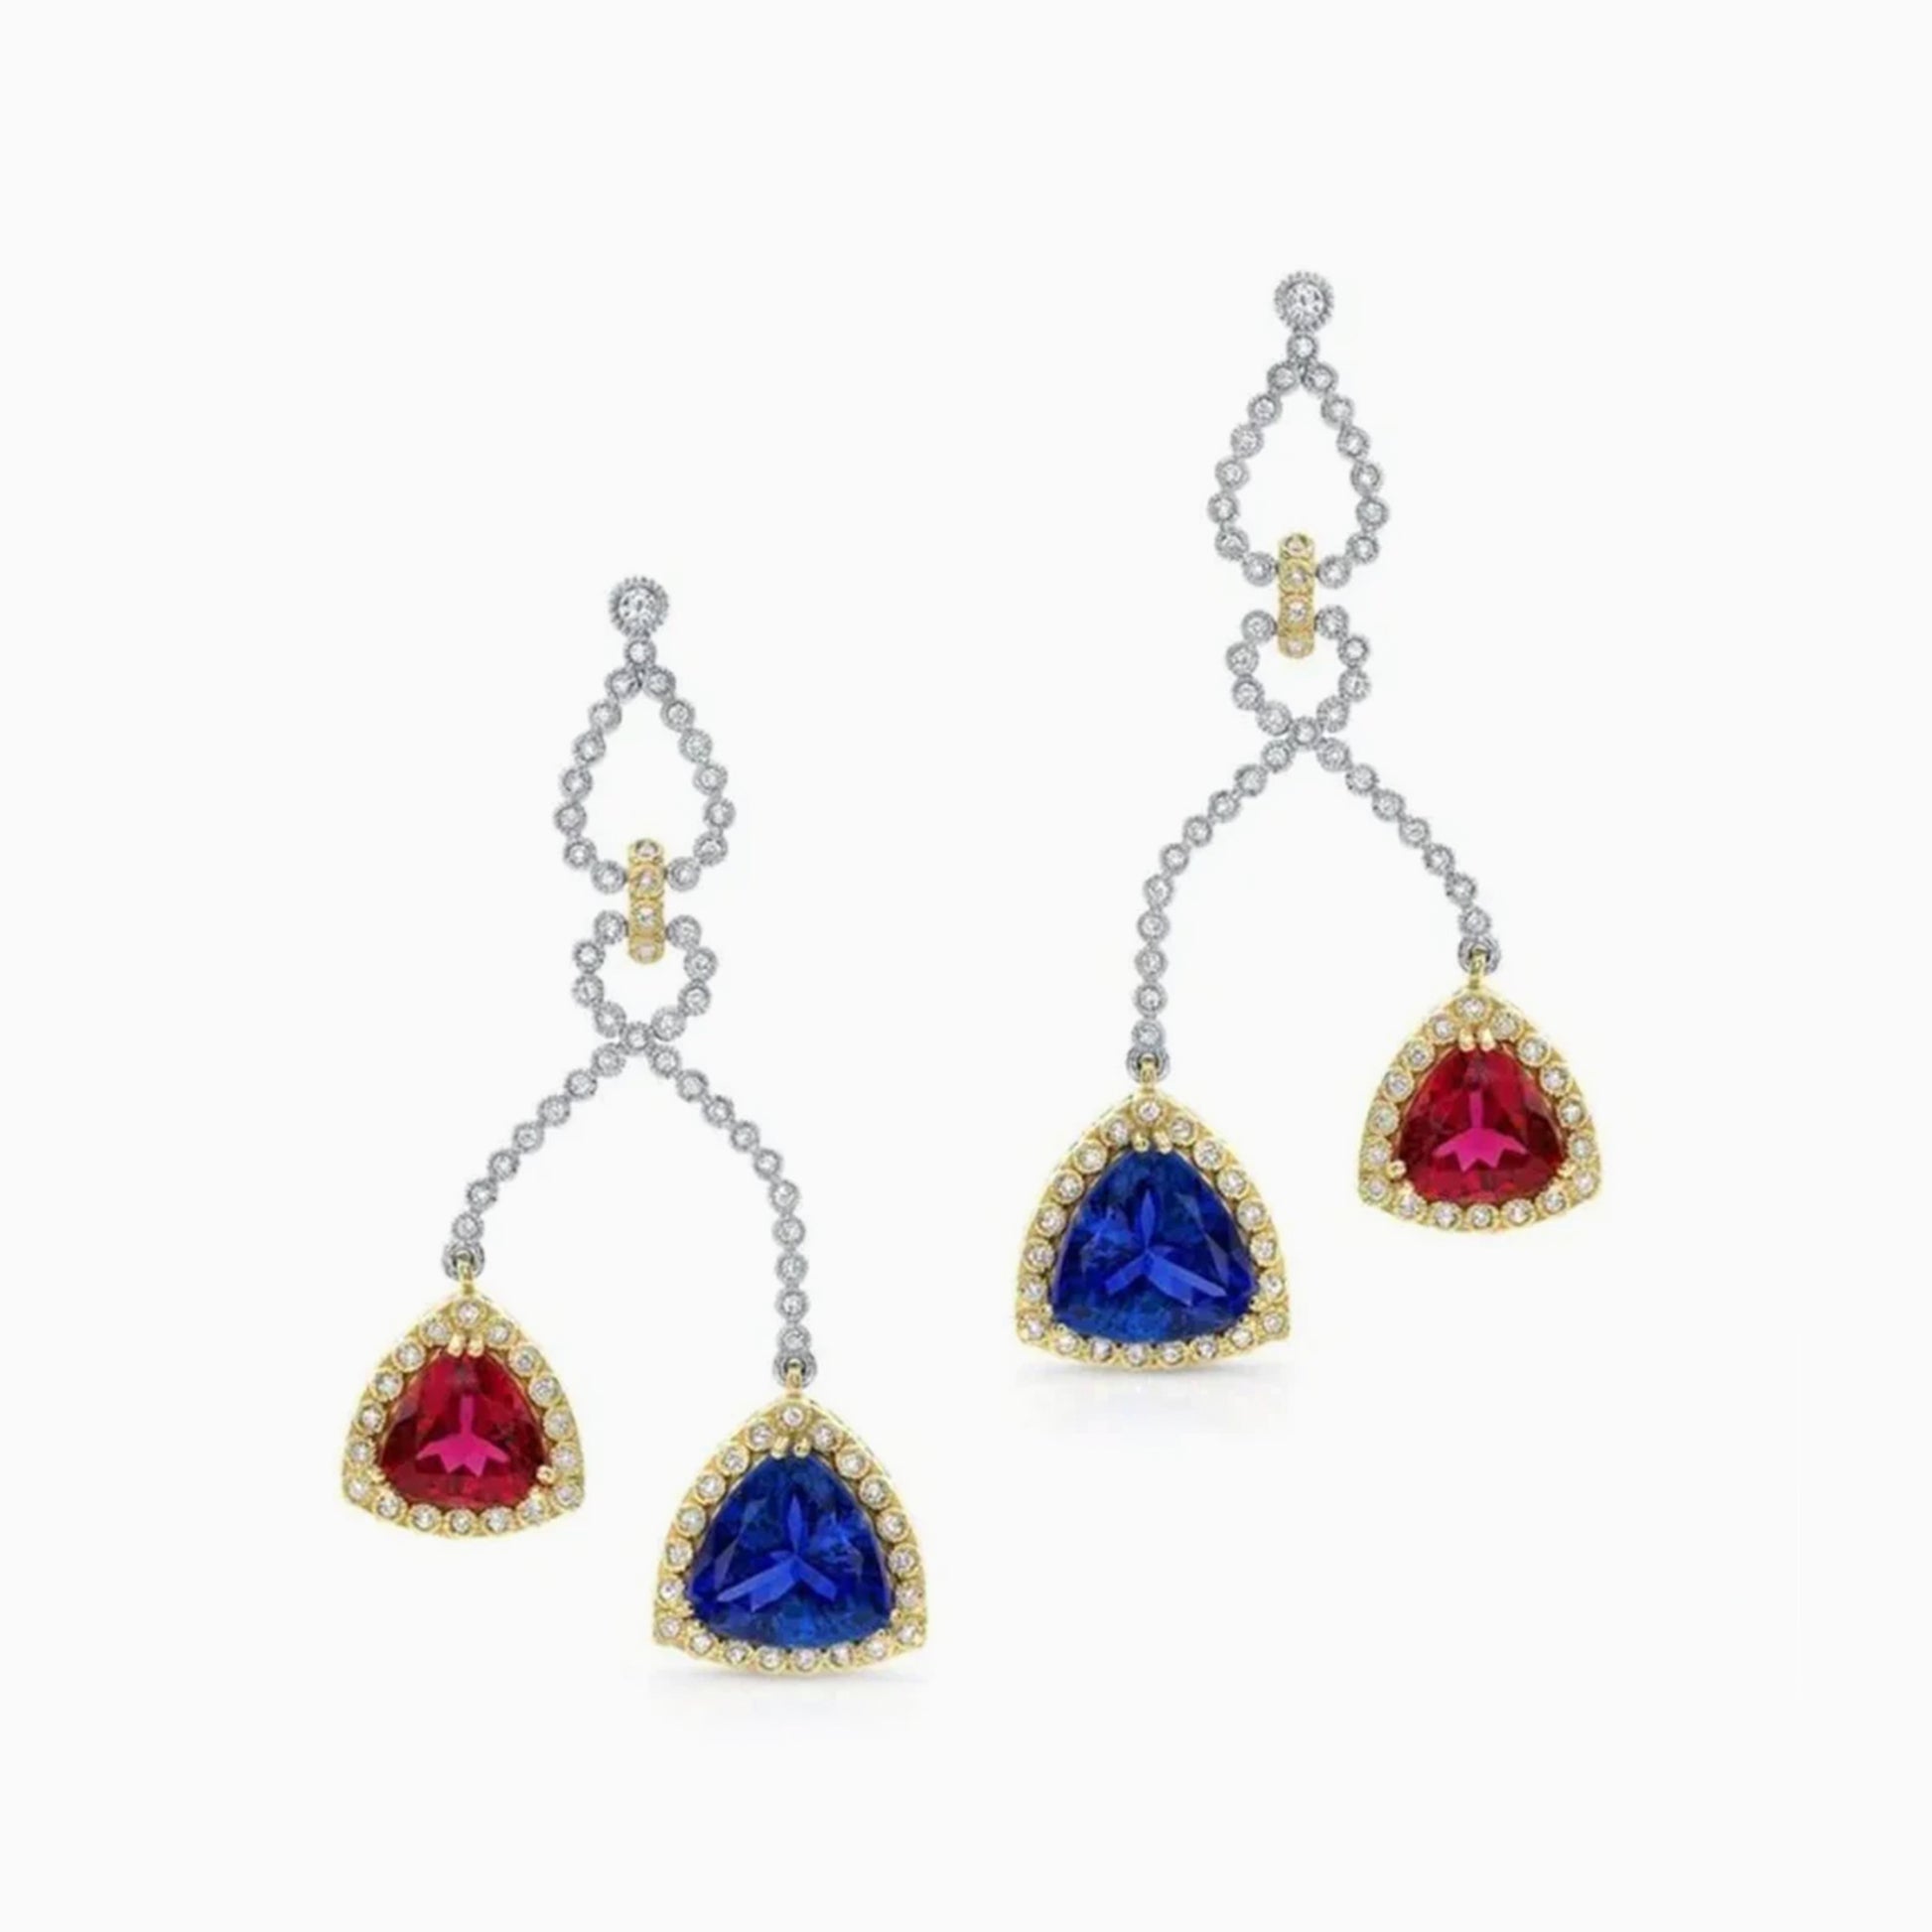 Tanzanite & Rubellite Gold Earrings on a white background